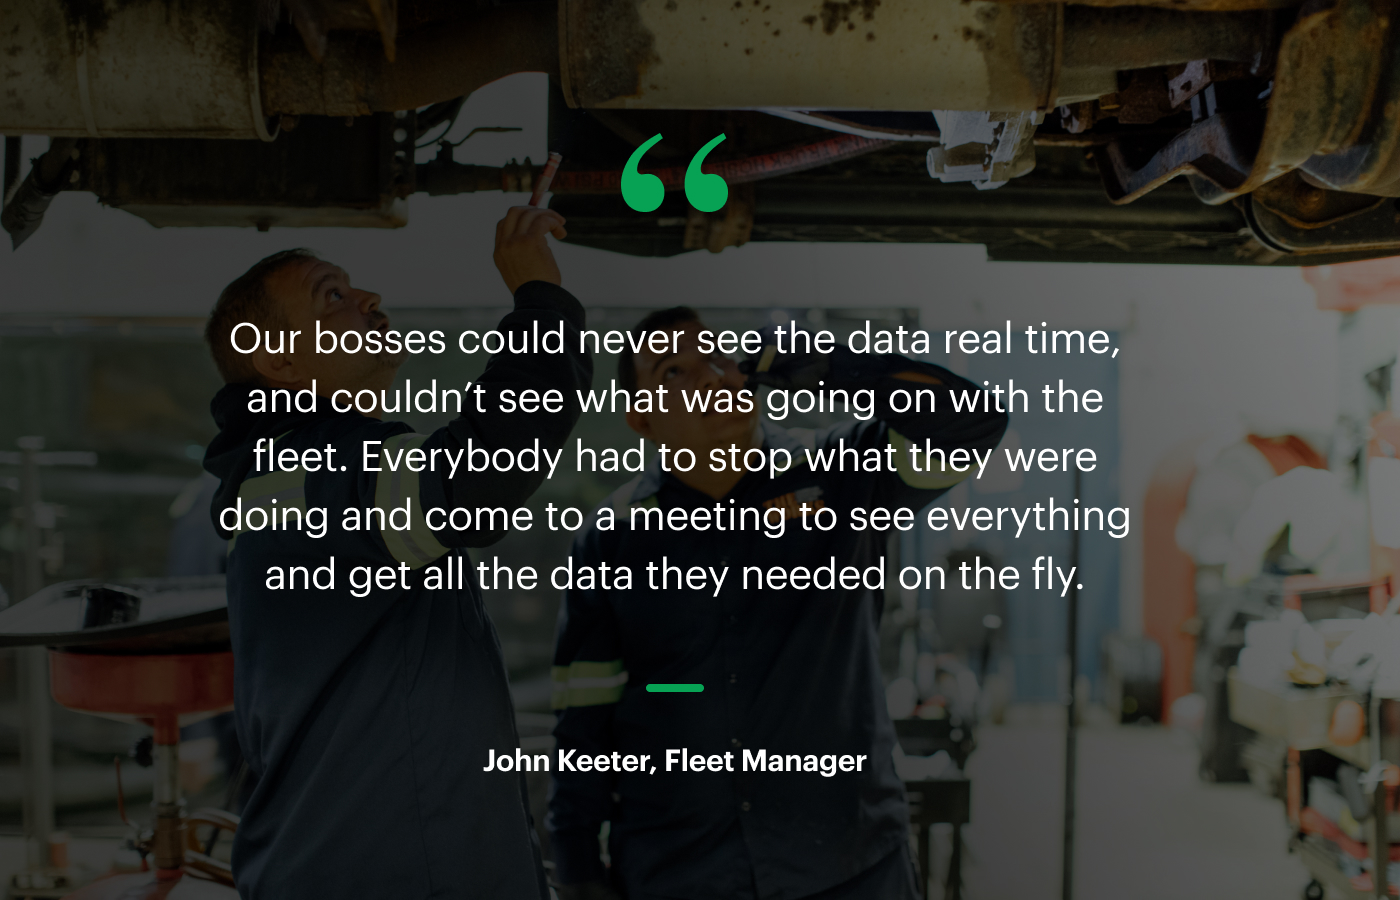 “Our bosses could never see the data real time, and couldn’t see what was going on with the fleet. Everybody had to stop what they were doing and come to a meeting to see everything and get all the data they needed on the fly.” – John Keeter, Fleet Manager